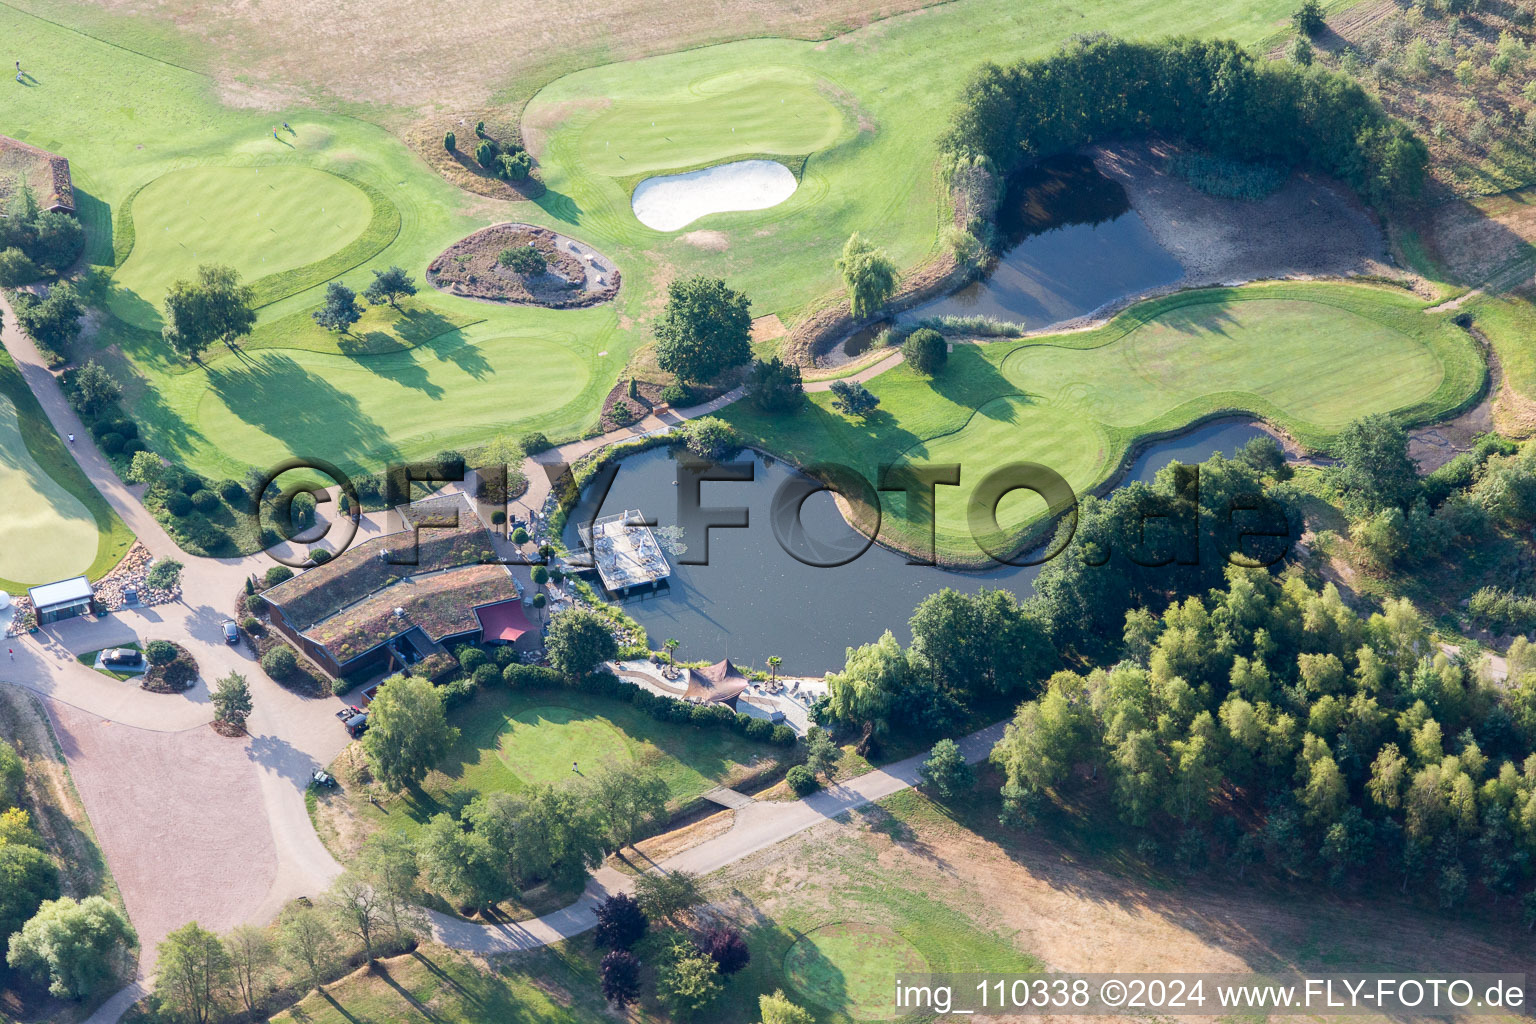 Bird's eye view of Grounds of the Golf course at Green Eagle Golf Courses in Winsen (Luhe) in the state Lower Saxony, Germany